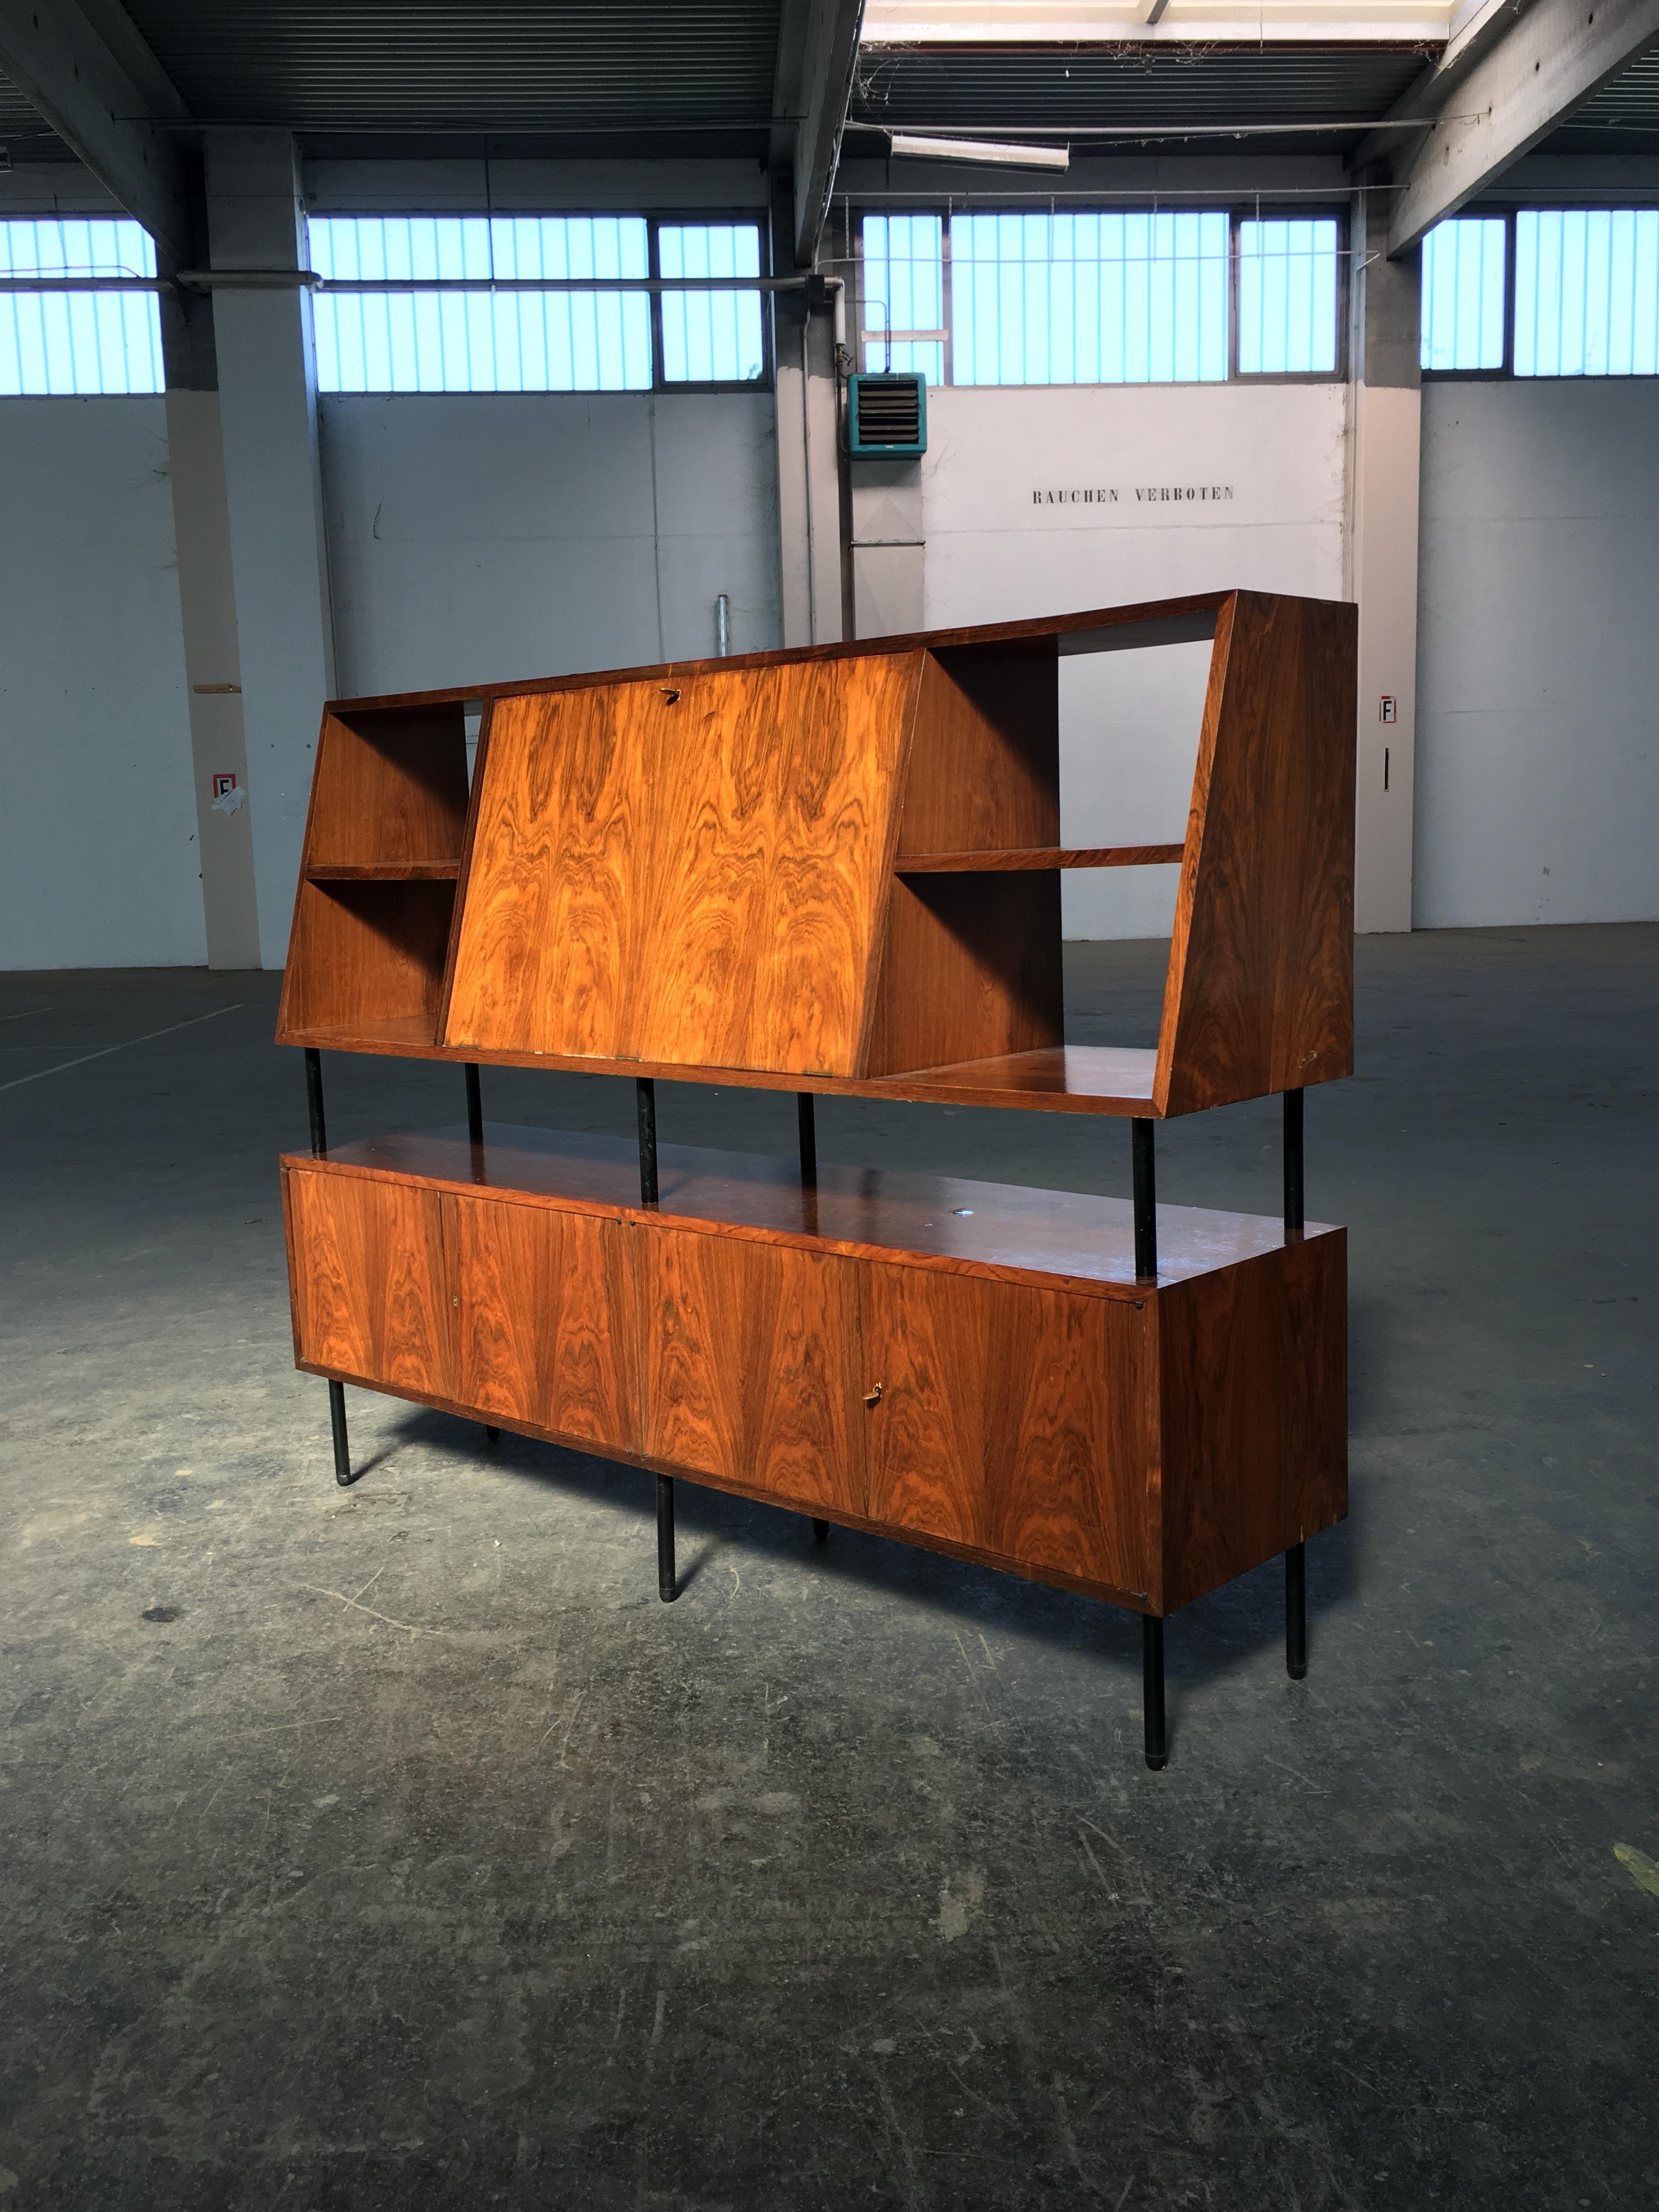 This bookshelf with bar cabinet is a rare and elegant piece designed by Carlo Hauner and Martin Eisler in Brazil 1955. 

The stunning piece presents several storage compartments, with four cabinets in the bottom, niches, and a spacious bar cabinet